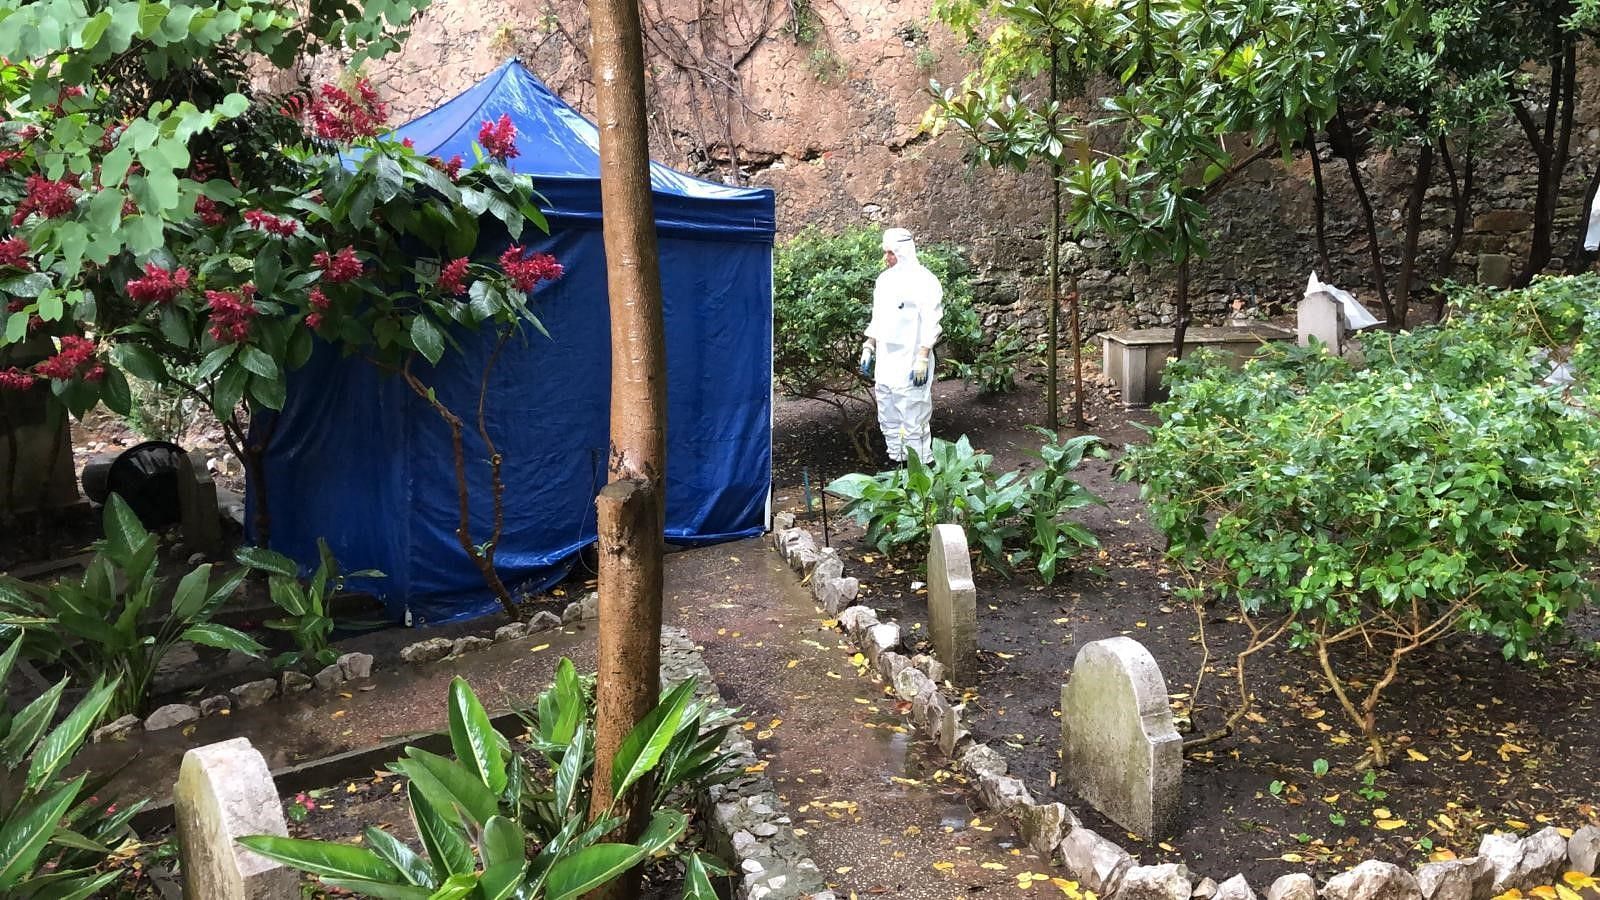 Searches done in Trafalgar Cemetery (Image via Hampshire and Isle of Wight Constabulary)